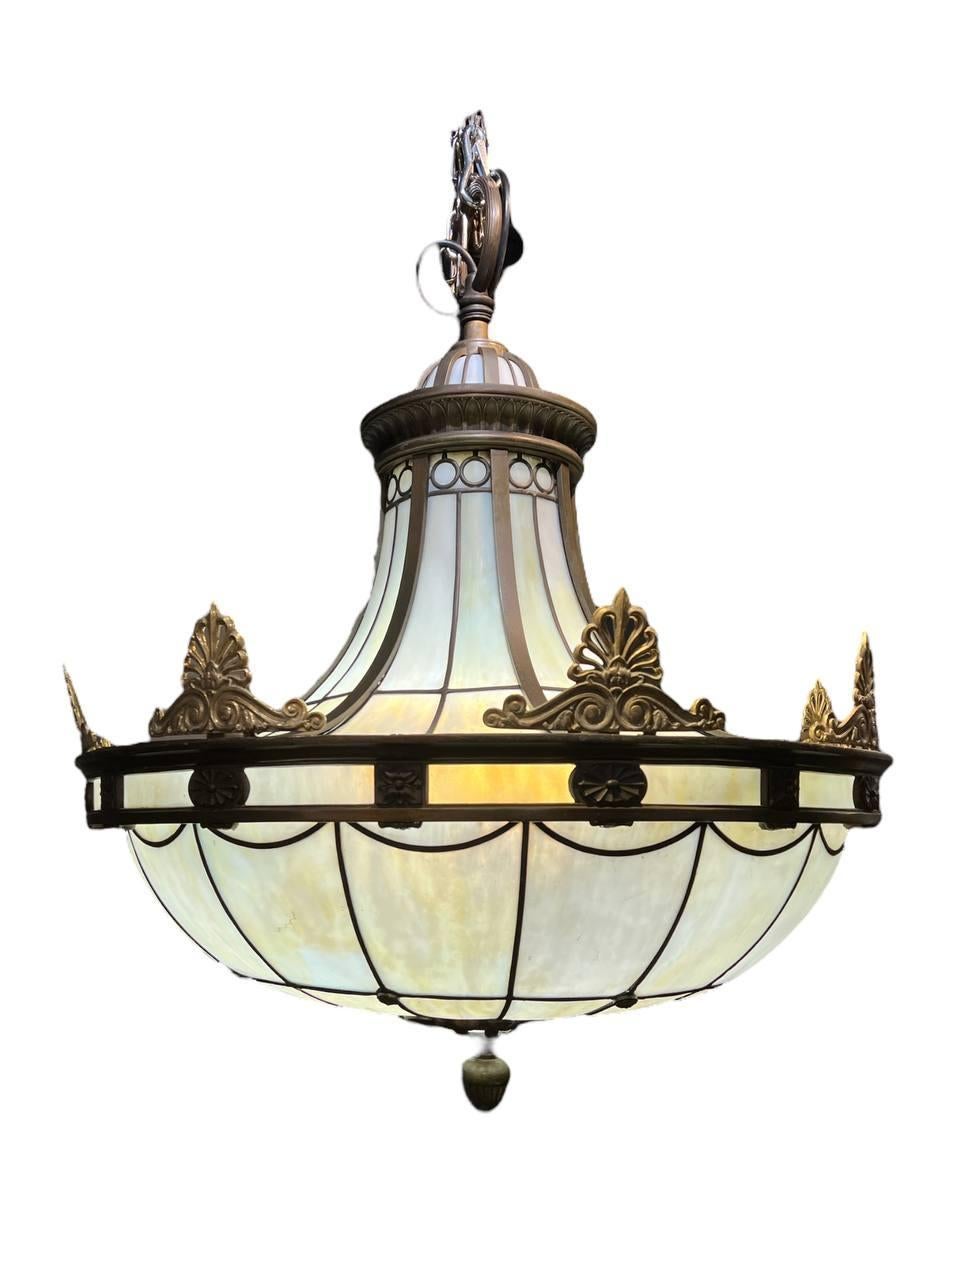 20th Century 1900s Caldwell Leaded Glass Light Fixture For Sale